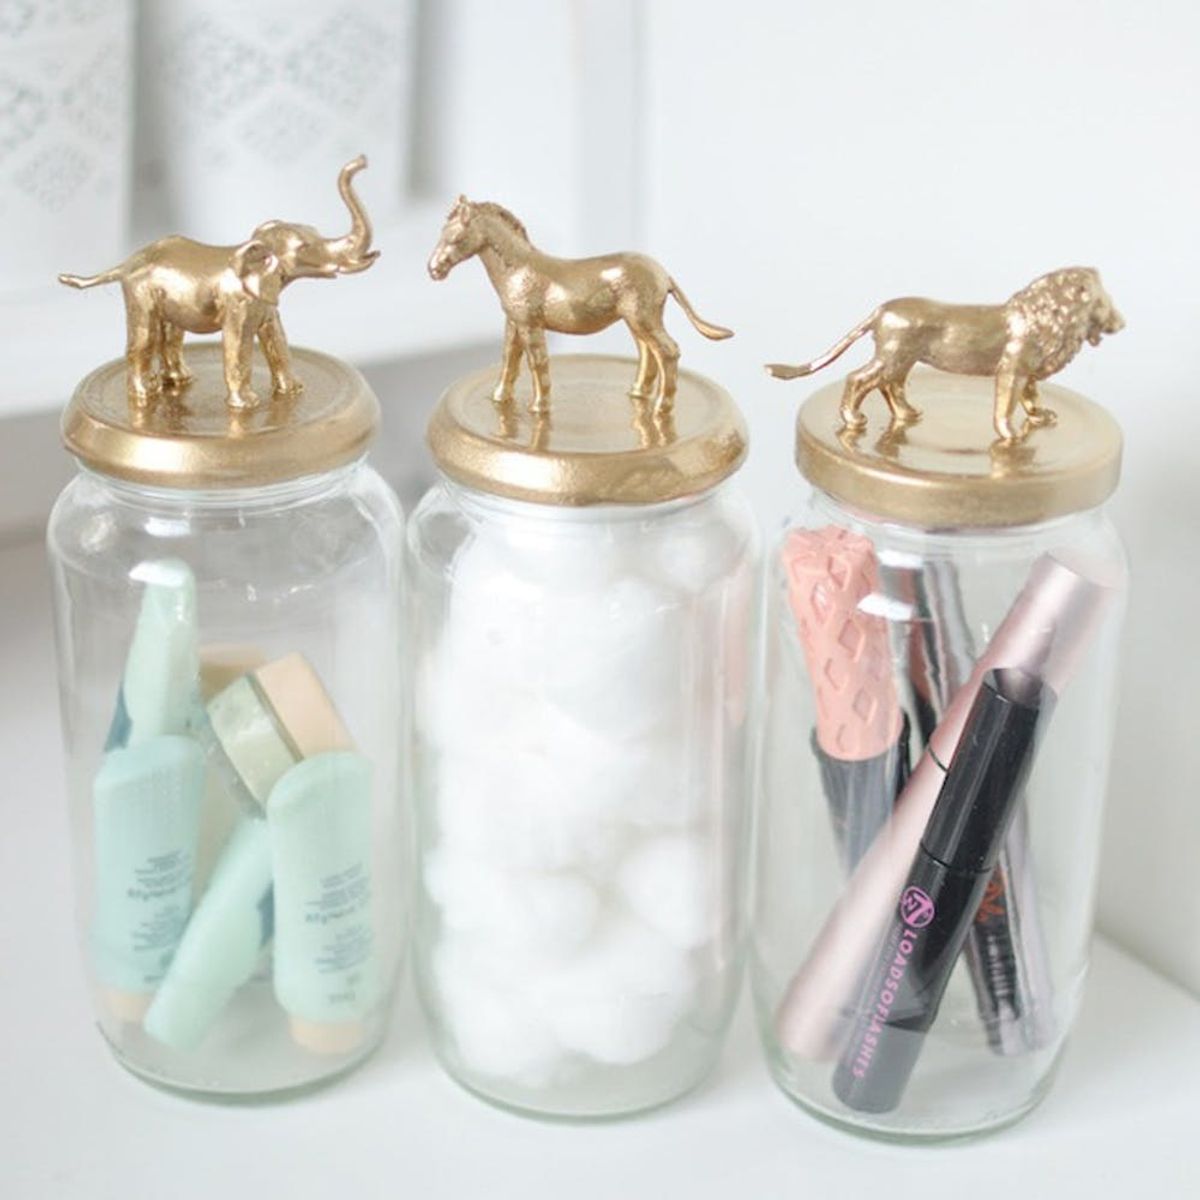 Update Your Bathroom for Spring With These Ultra Chic DIYs